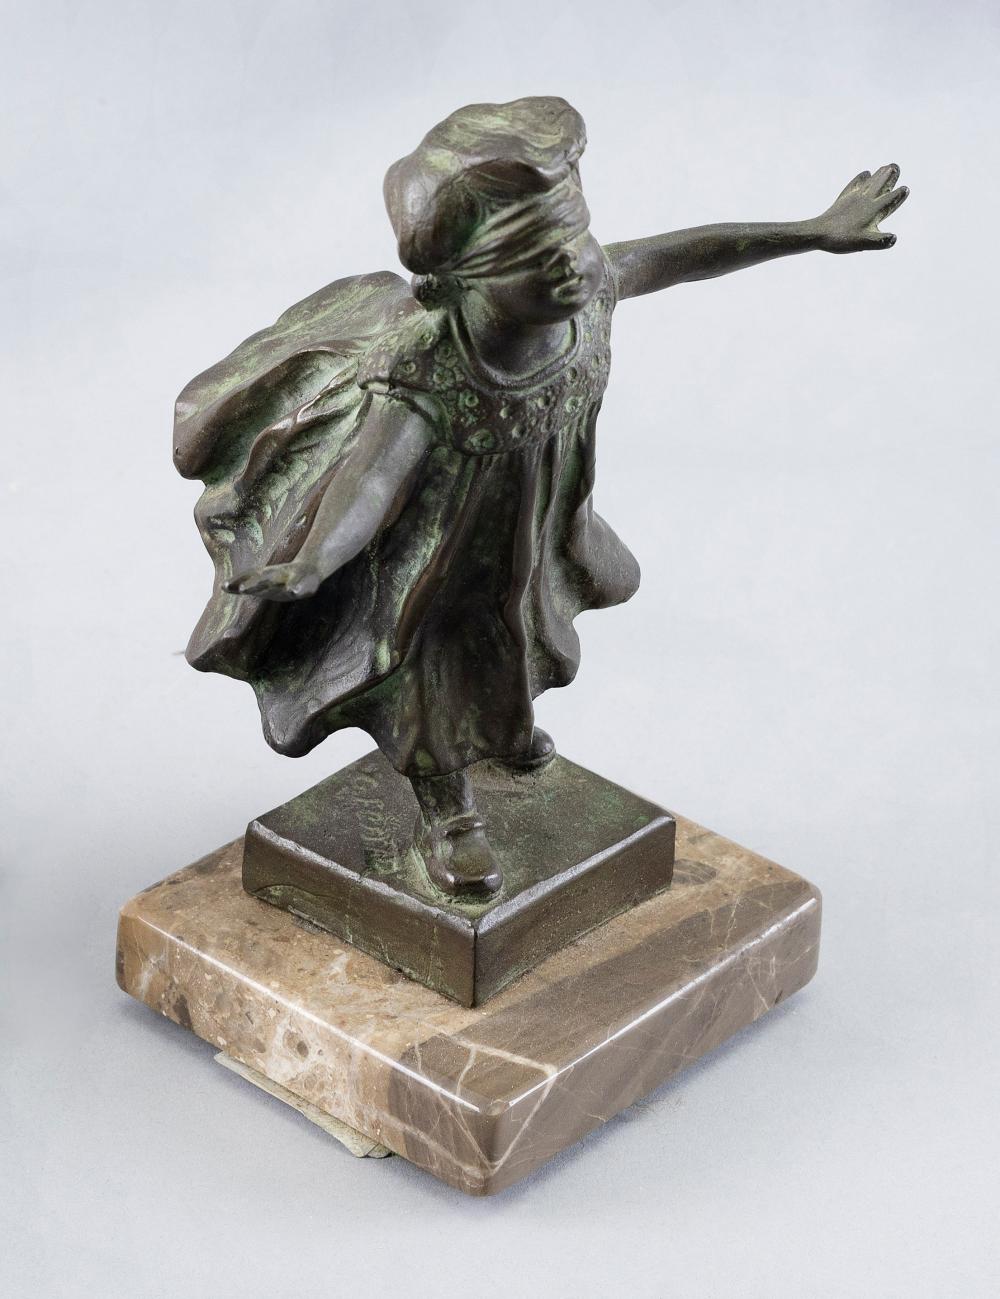 BRONZE SCULPTURE OF A YOUNG GIRL